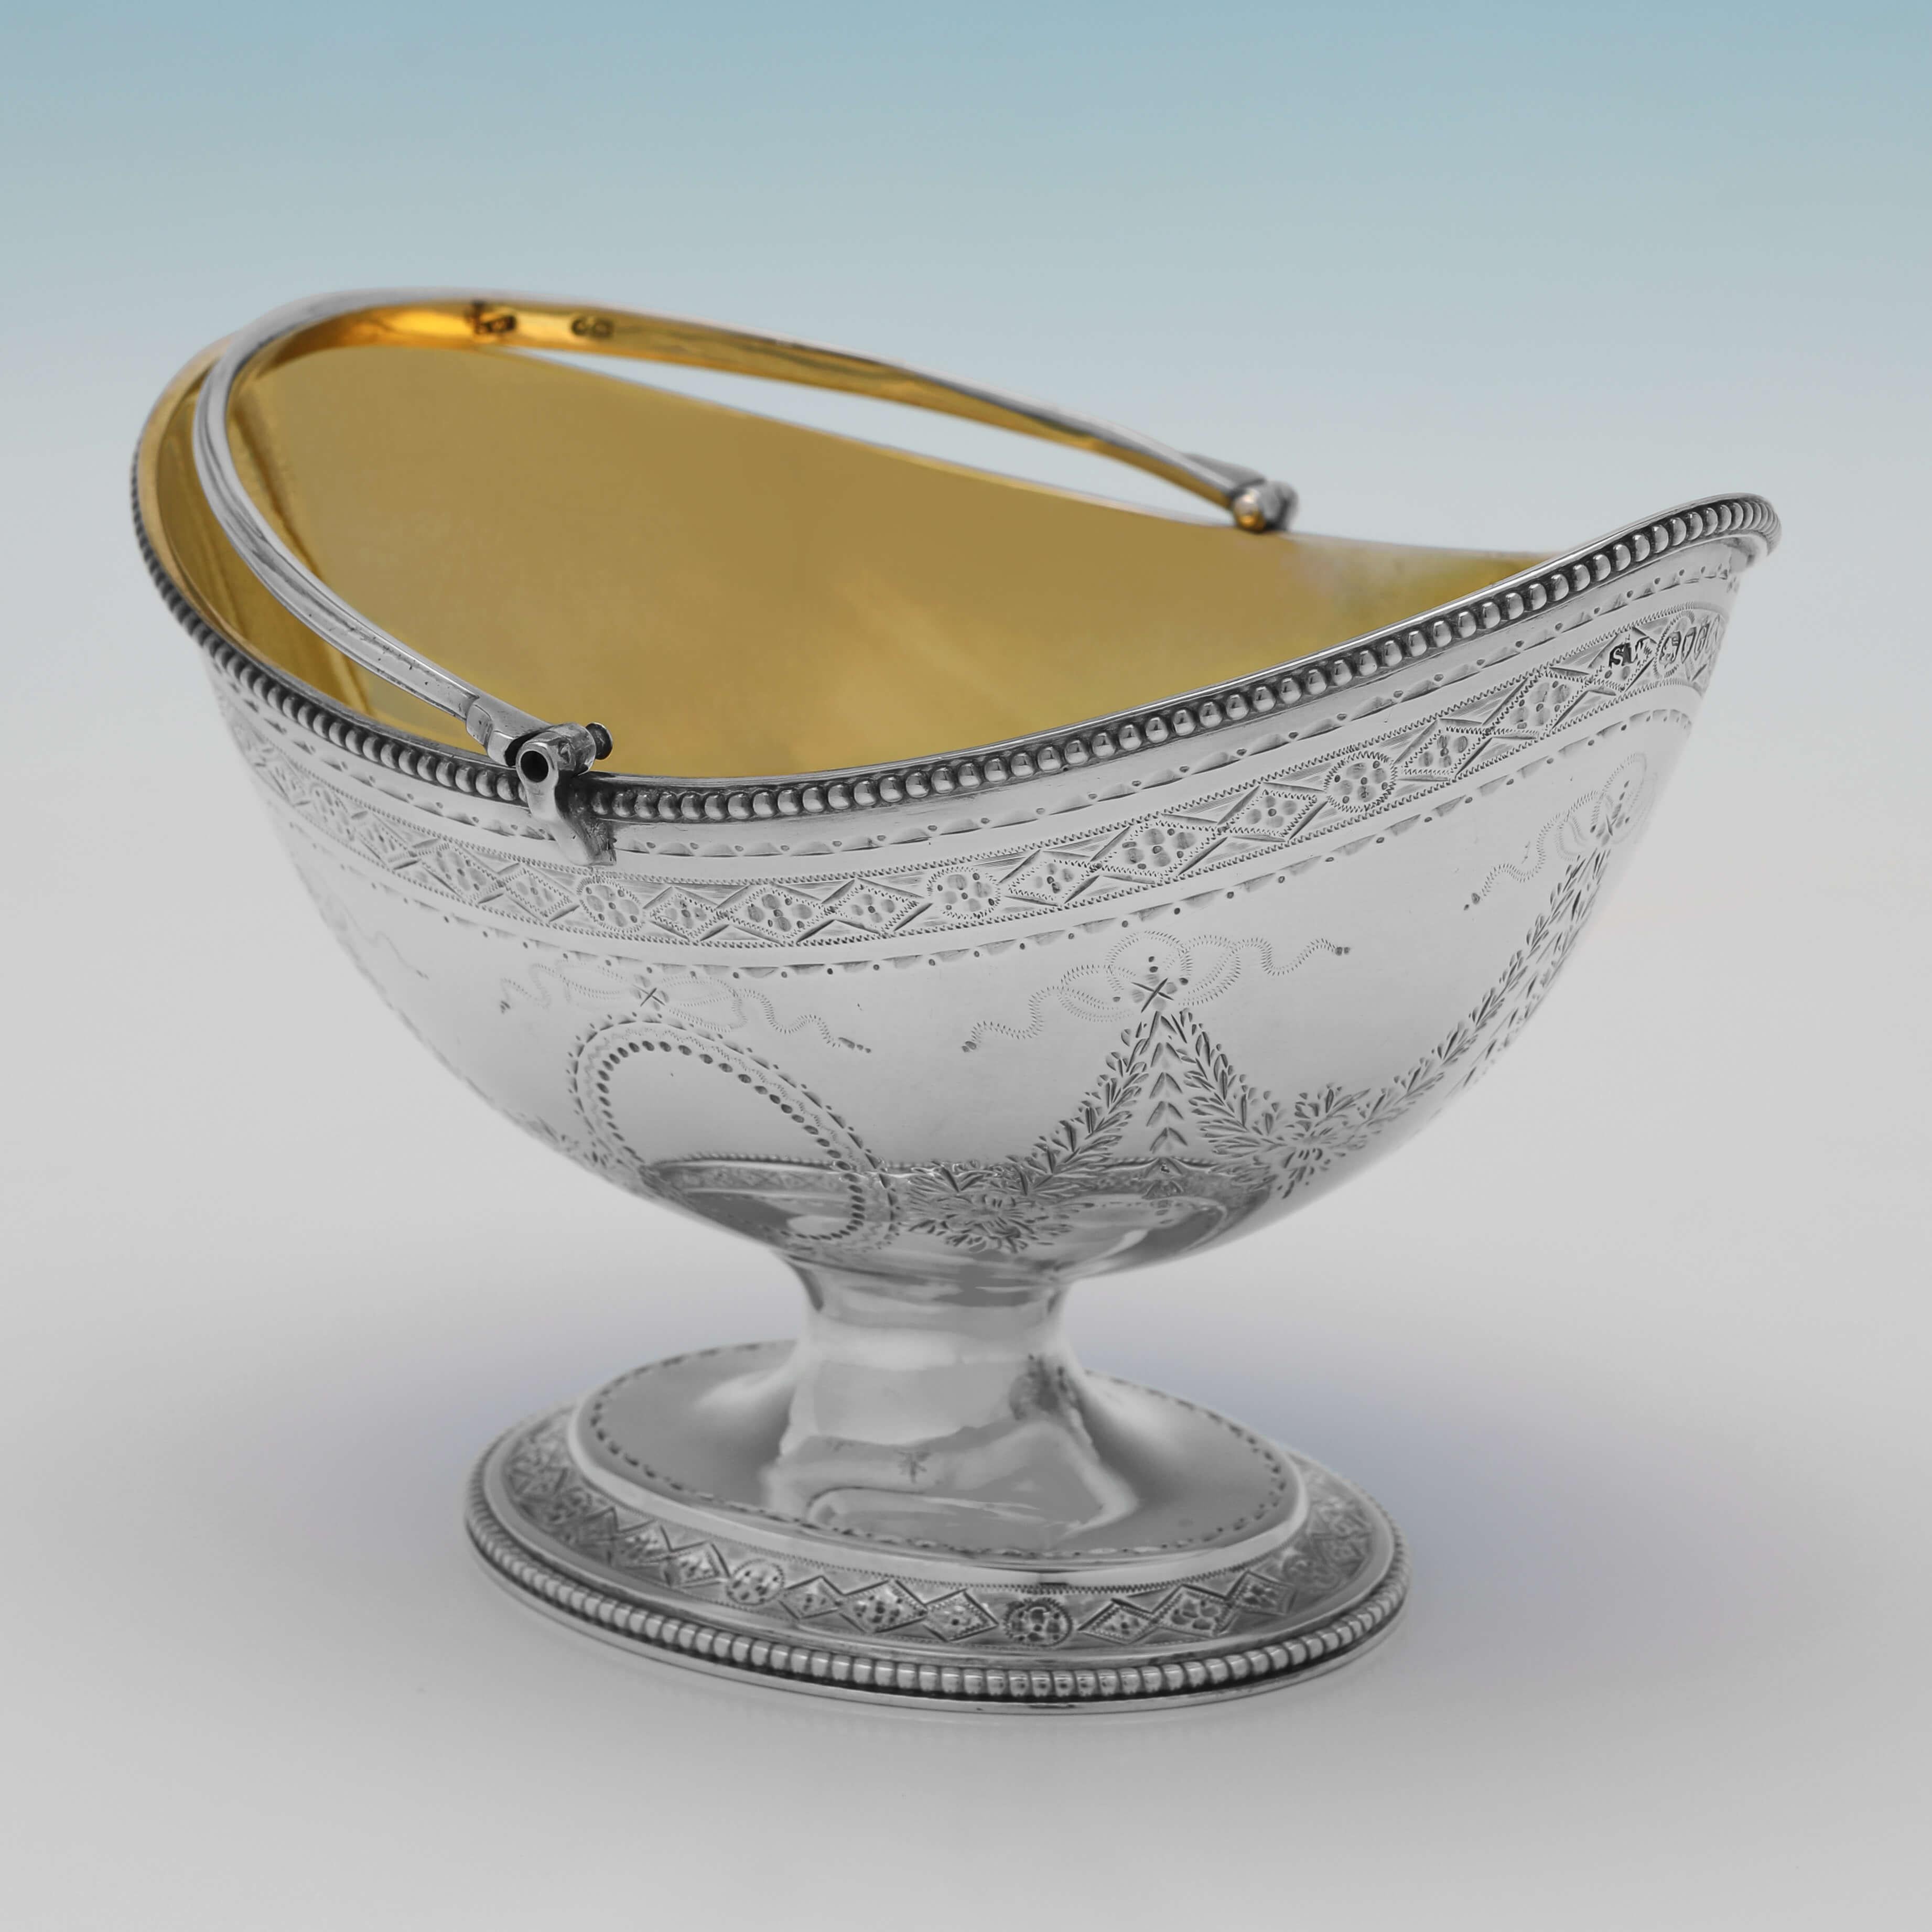 Hallmarked in London in 1882 by Samuel Whitford II, this very attractive, Victorian, Antique Sterling Silver Sugar Basket, features bright cut engraved decoration to the body and foot, bead borders, and a gilt interior. 

The sugar basket measures